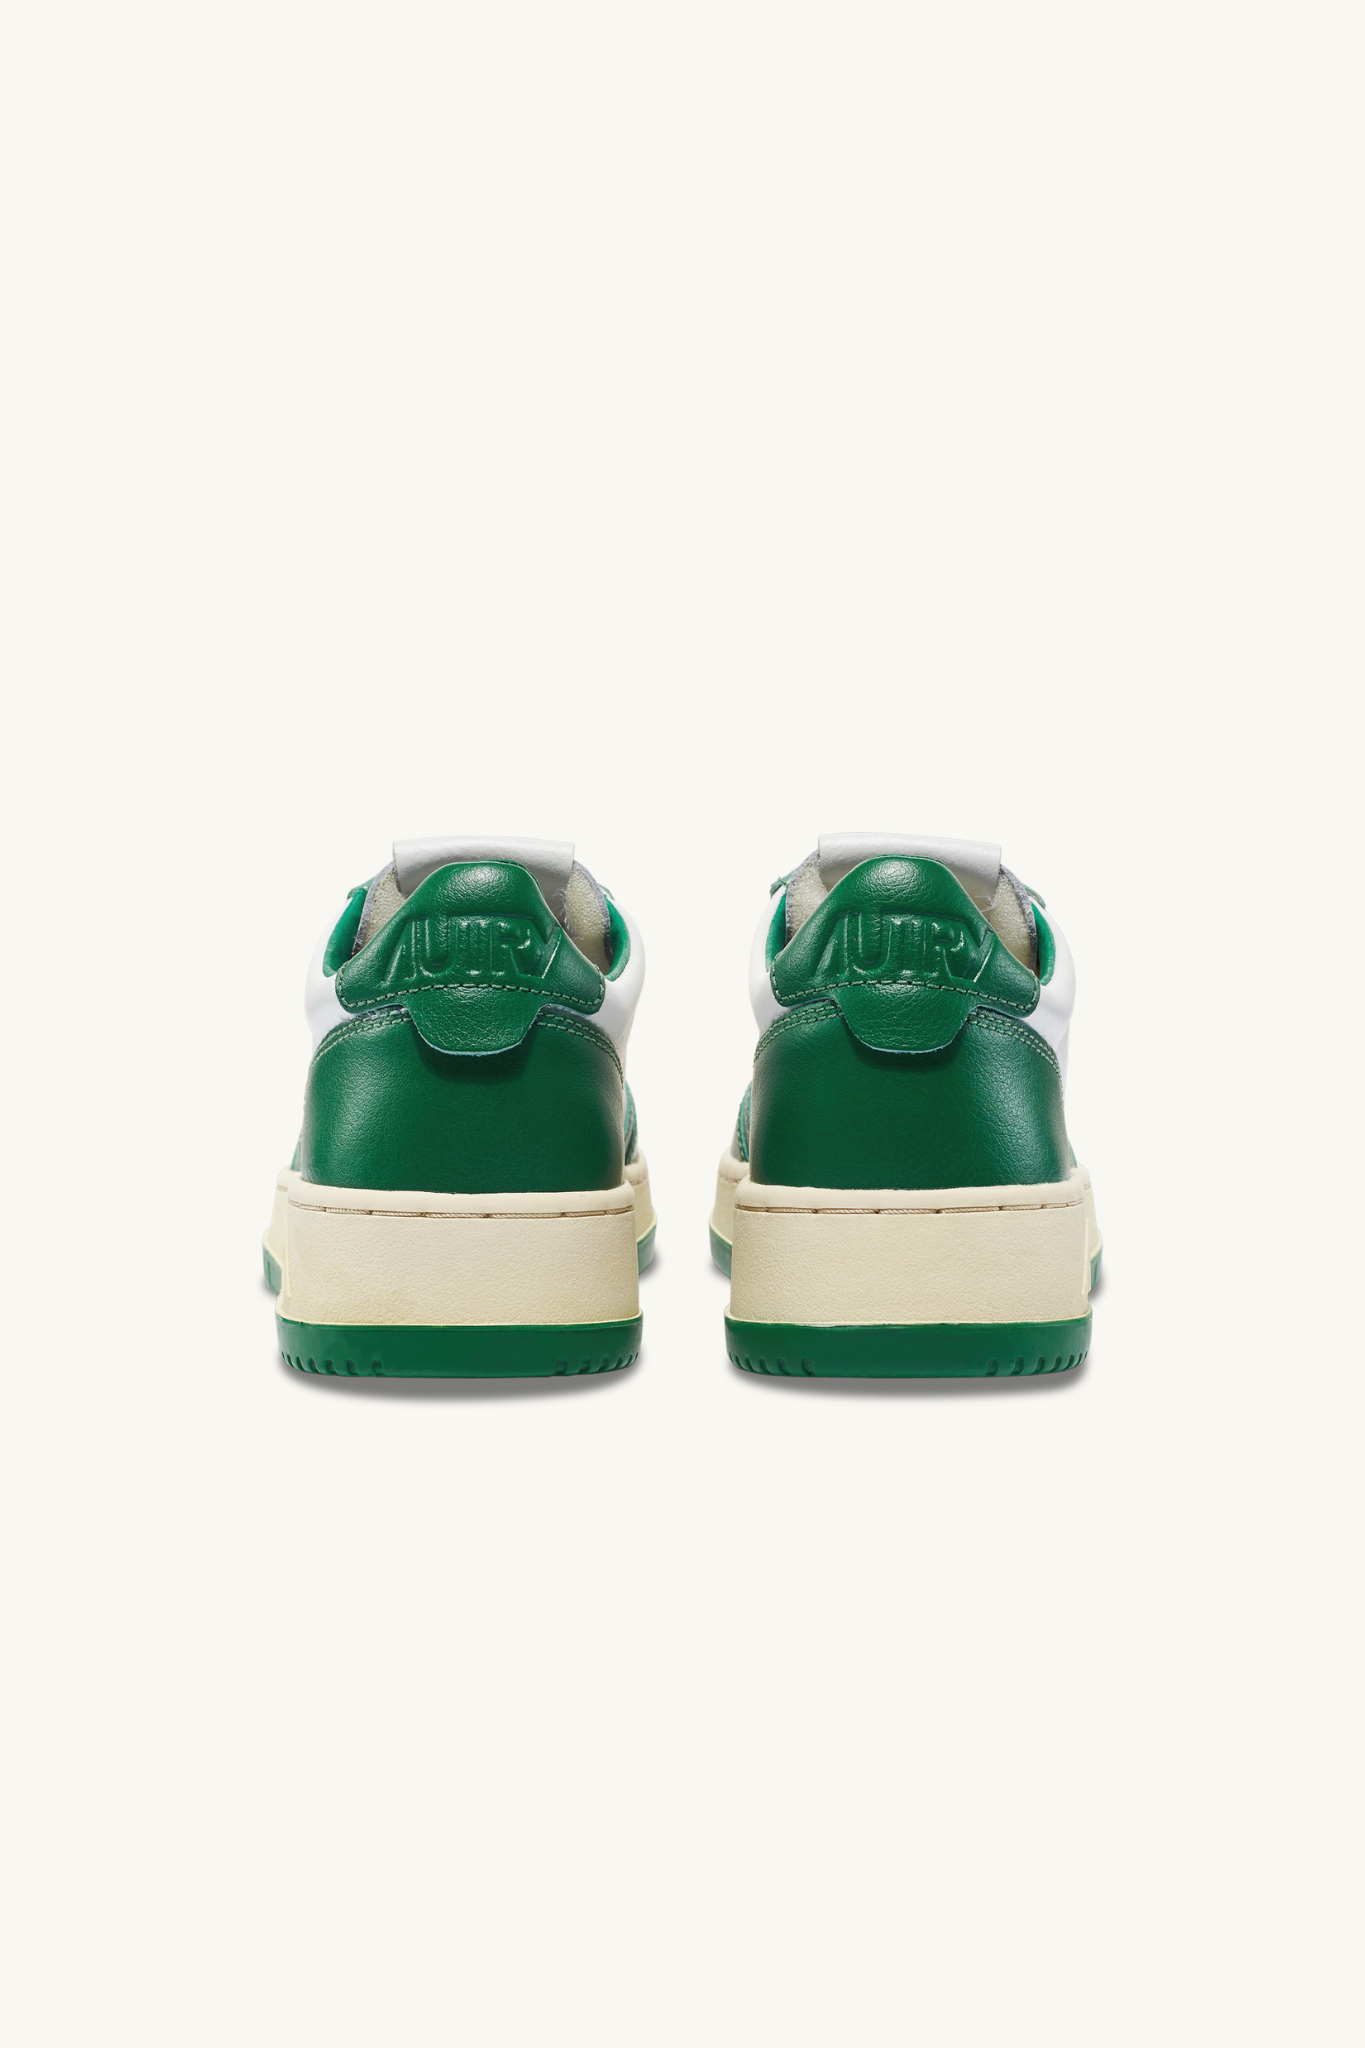 AULW-WB03 - MEDALIST LOW SNEAKERS IN TWO-TONE LEATHER COLOR WHITE AND GREEN